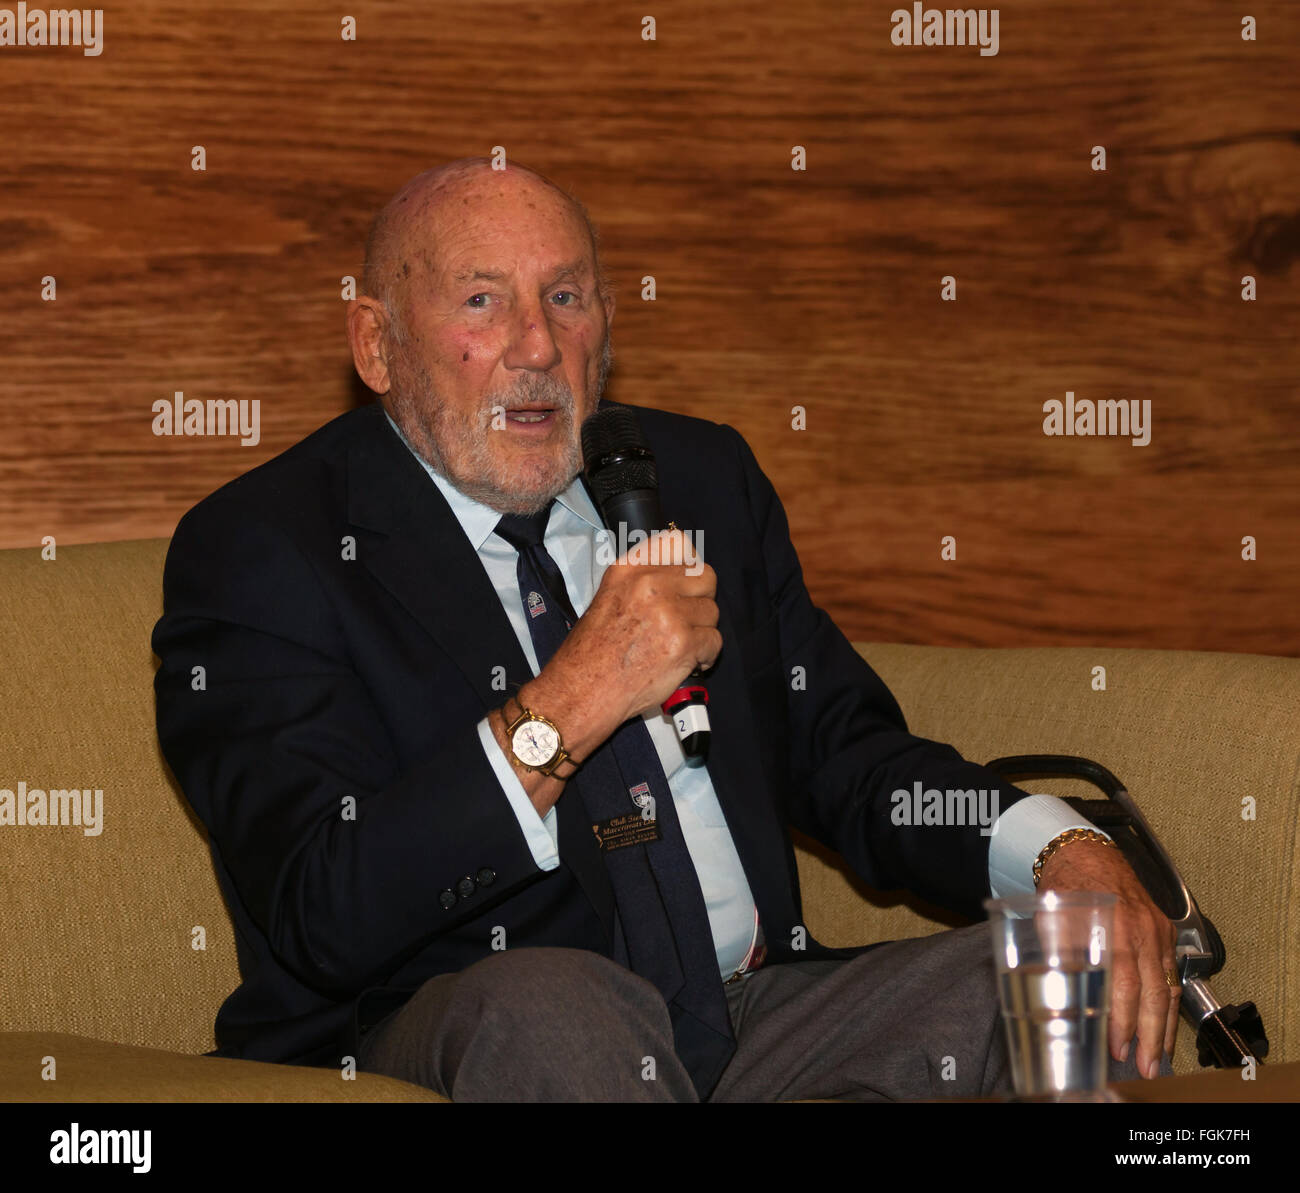 Sir Stirling Moss receiving applause from a large and appreciative audience, after his  interview, about his new book 'Stirling Moss- My Racing Life' at Speakers' Corner during the 2016 London Classic Car Show. Stock Photo